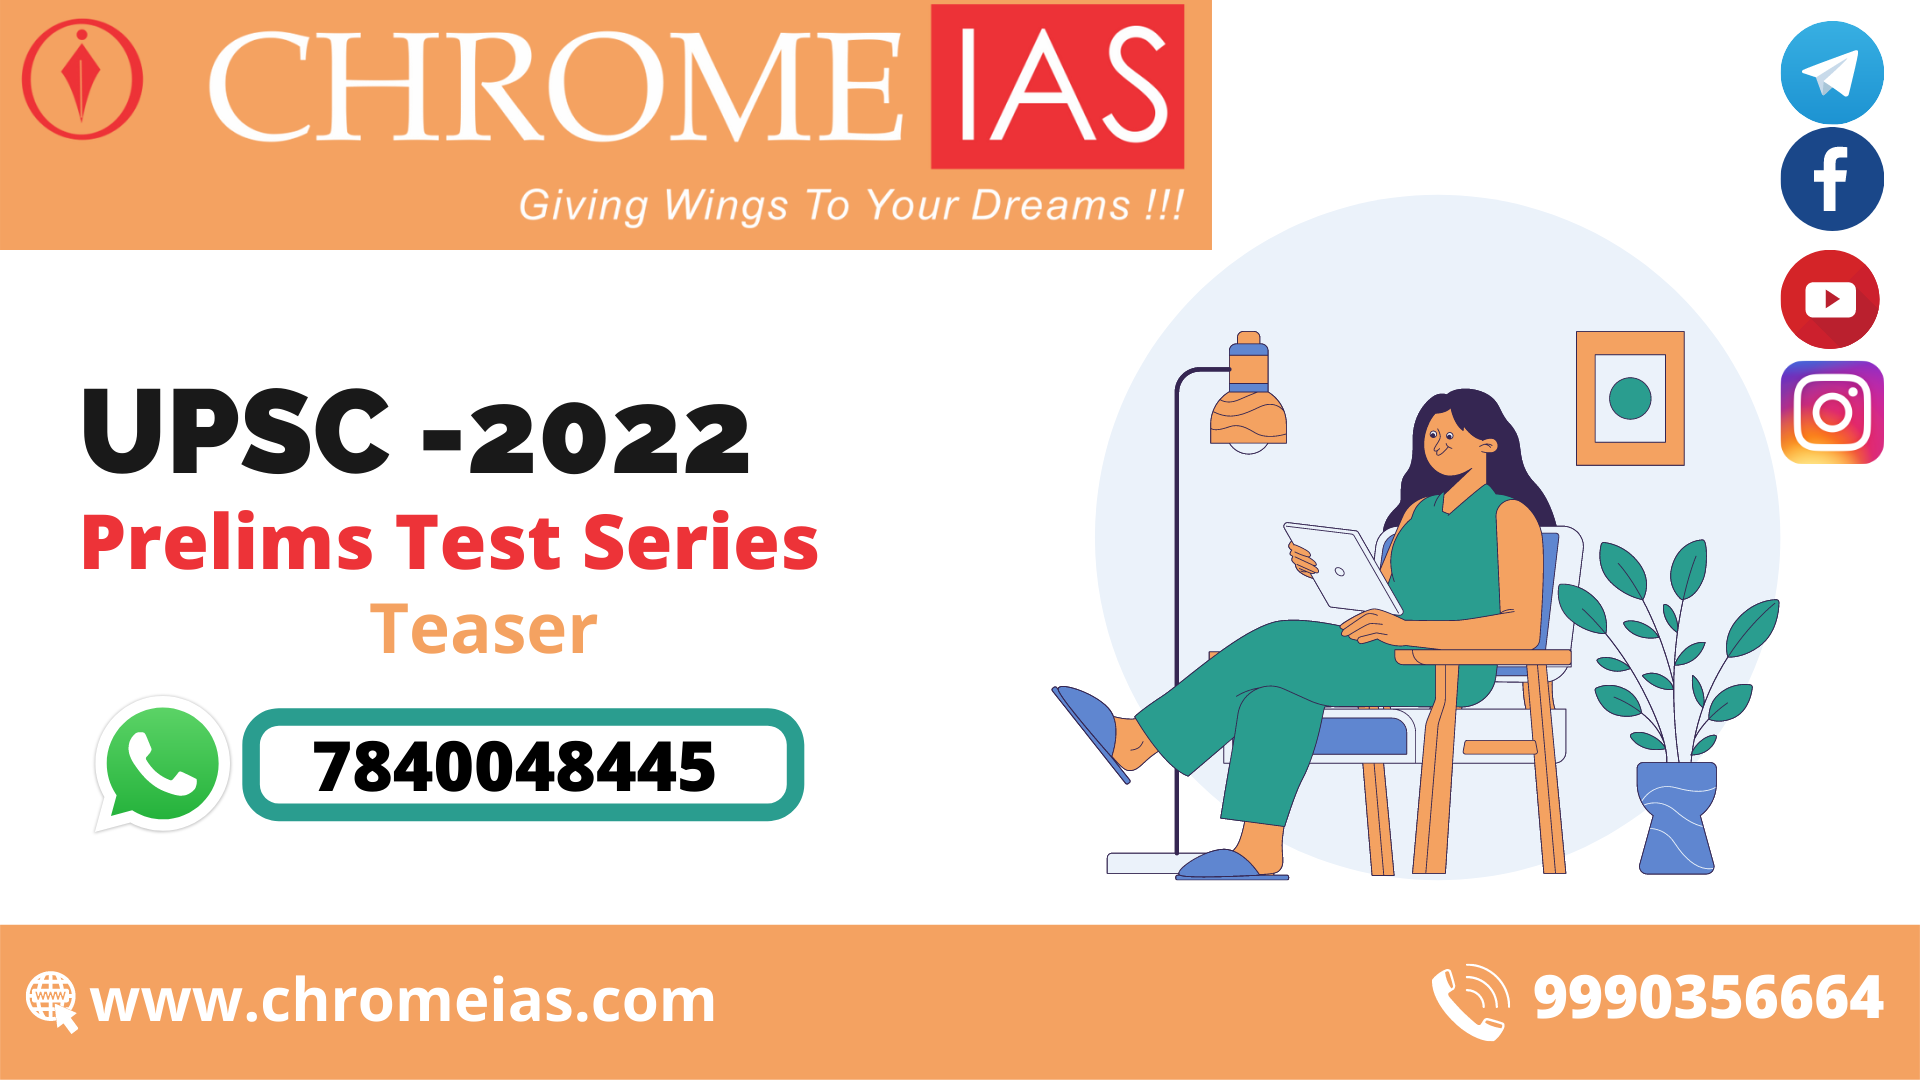 UPSC PRELIMS TEST SERIES 2022Education and LearningCoaching ClassesCentral DelhiKarol Bagh